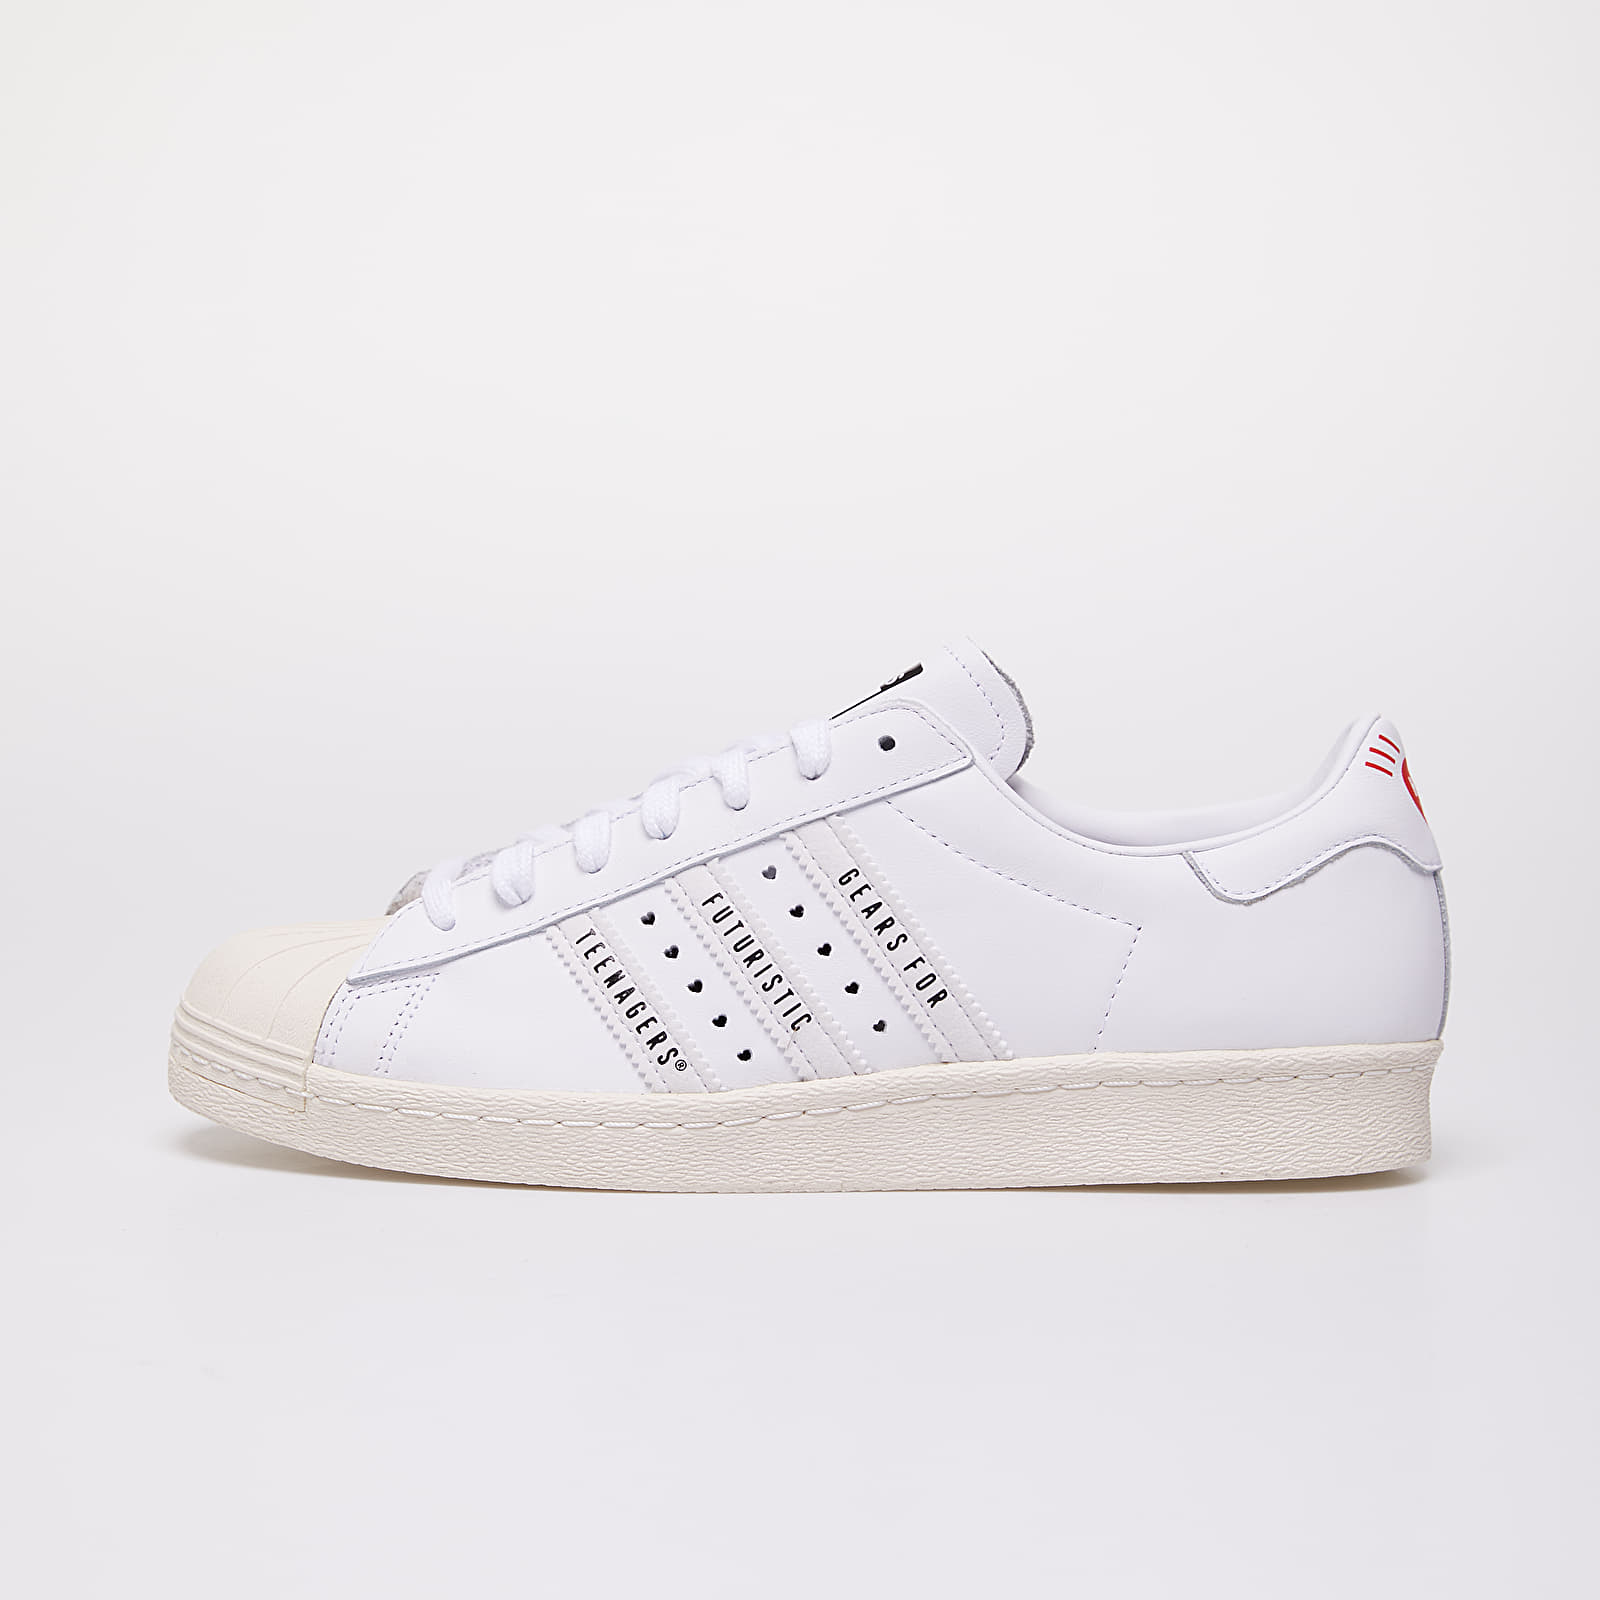 Men's shoes adidas x Pharrell Williams Superstar 80s Human Made Core Black/ Ftwr White/ Off White